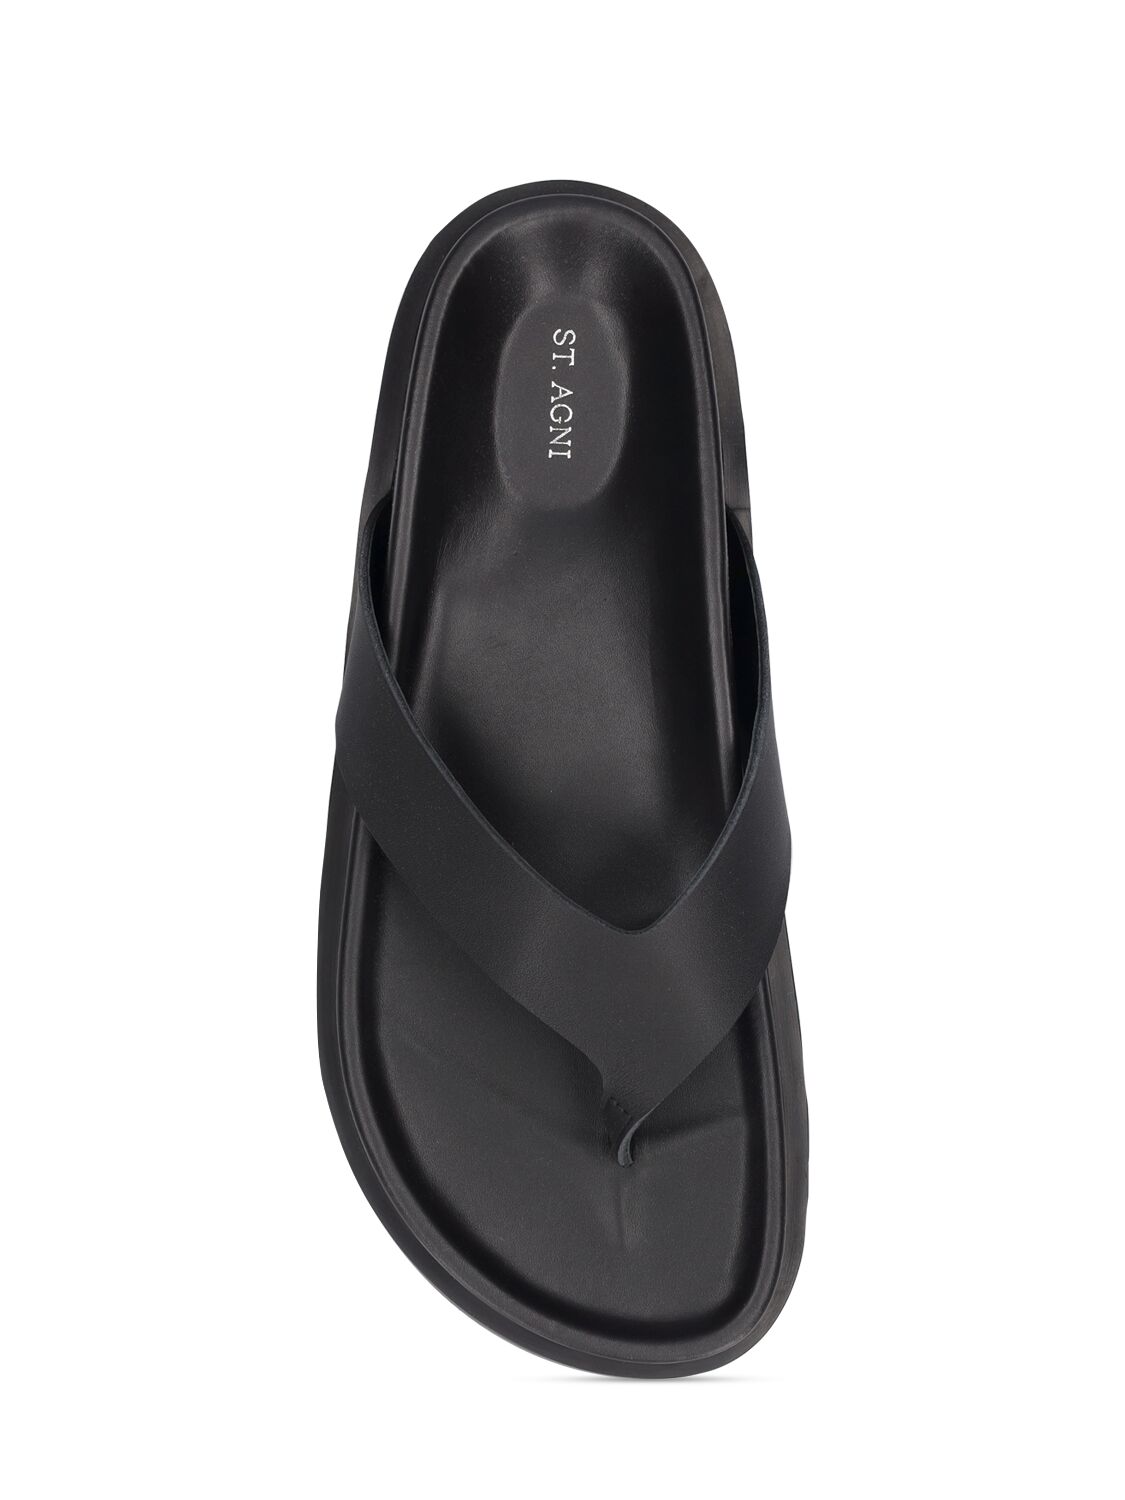 Shop St.agni 30mm Leather Thong Flat Sandals In Black